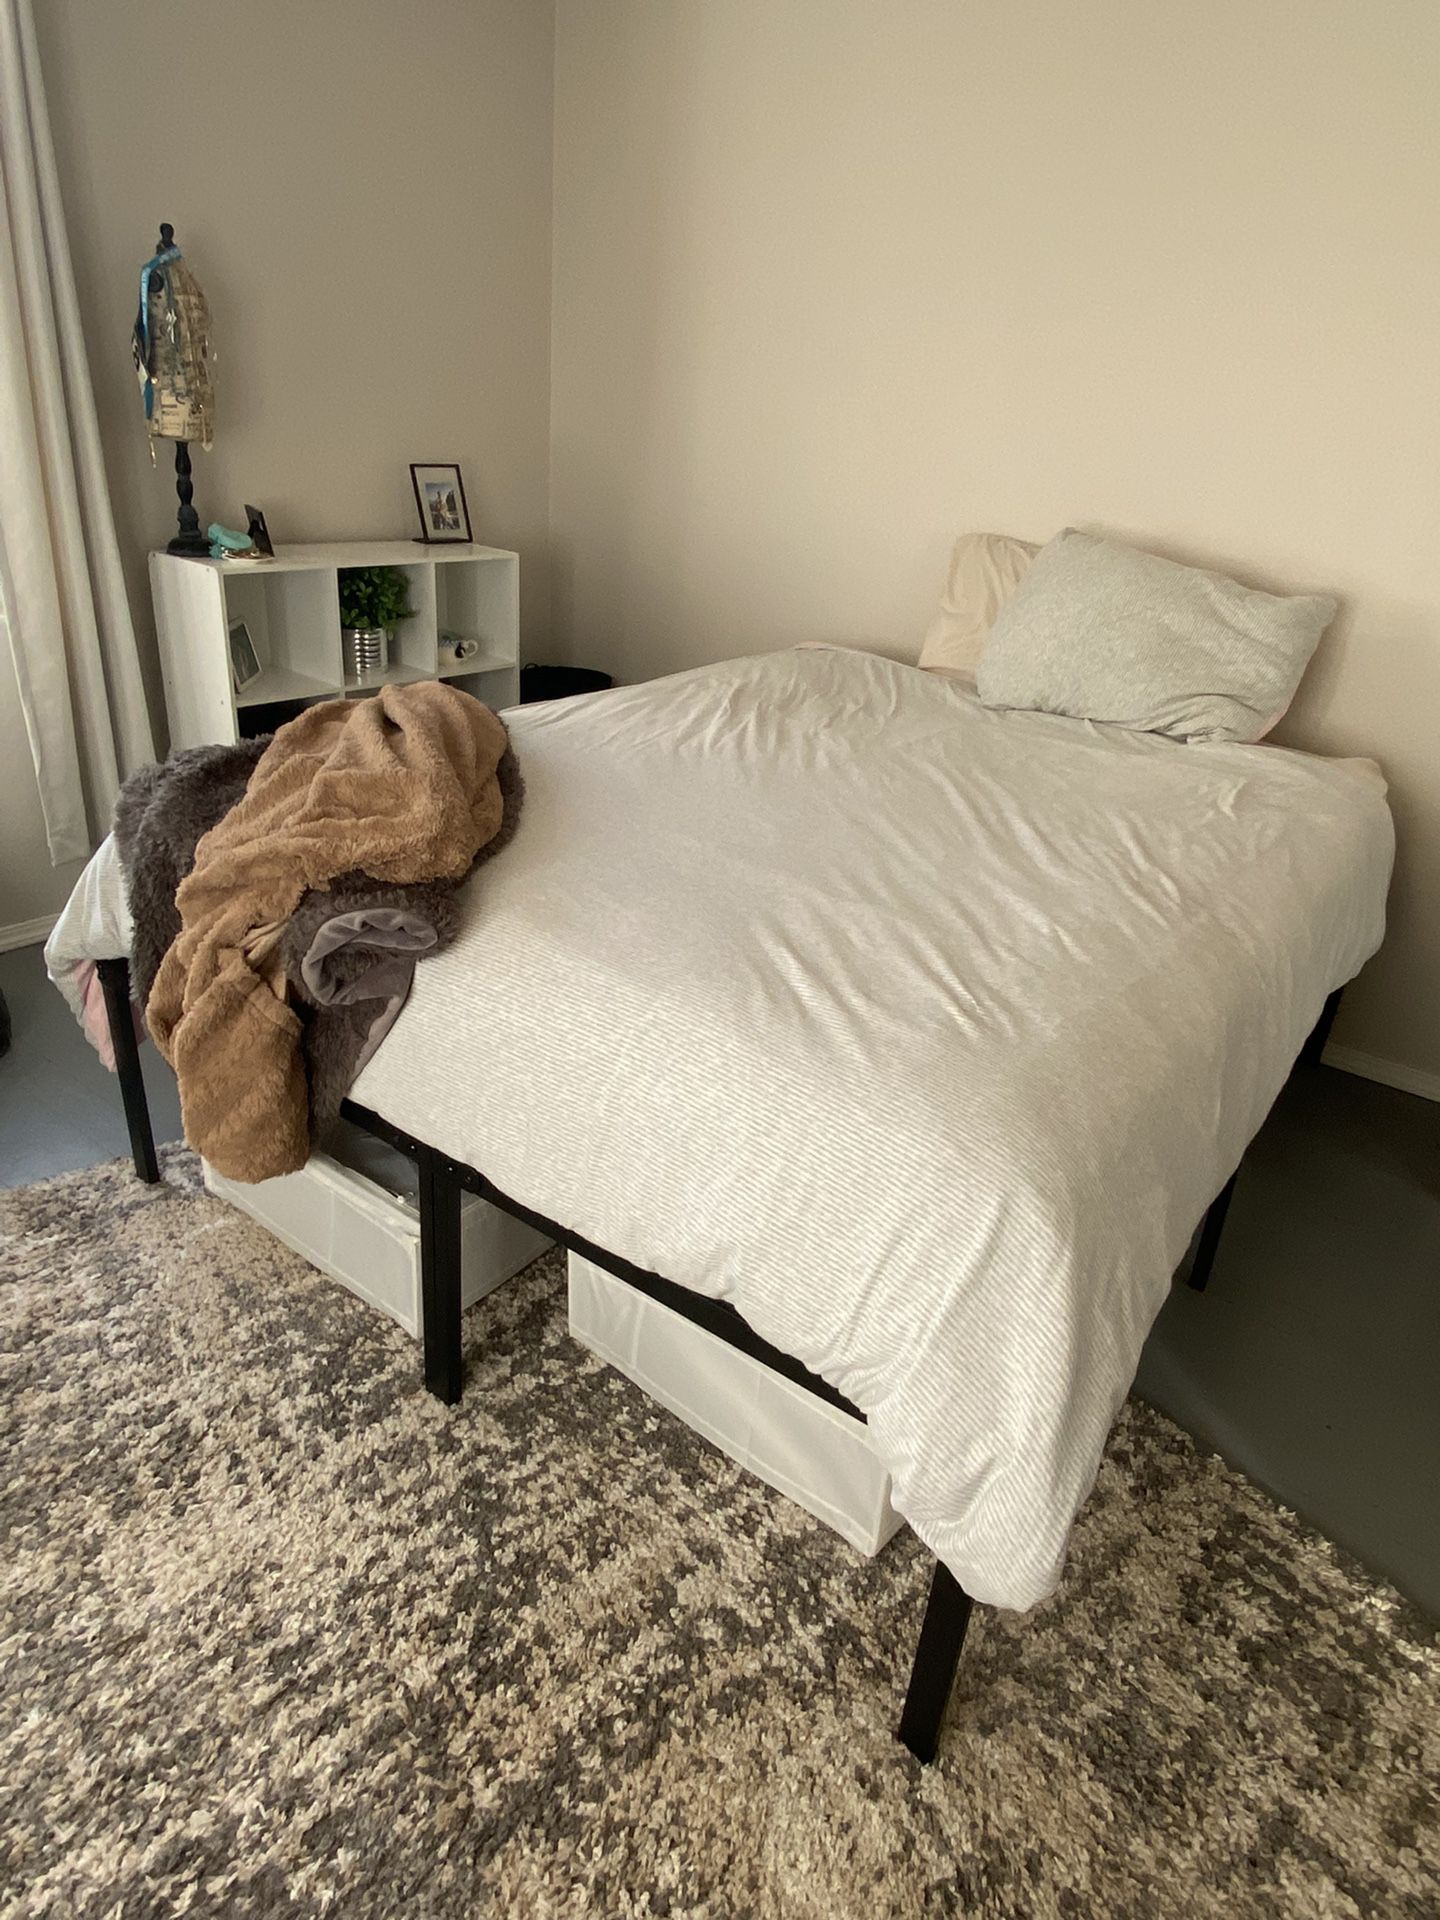 Queen Pillowtop Mattress, Boxspring, and Bed frame 